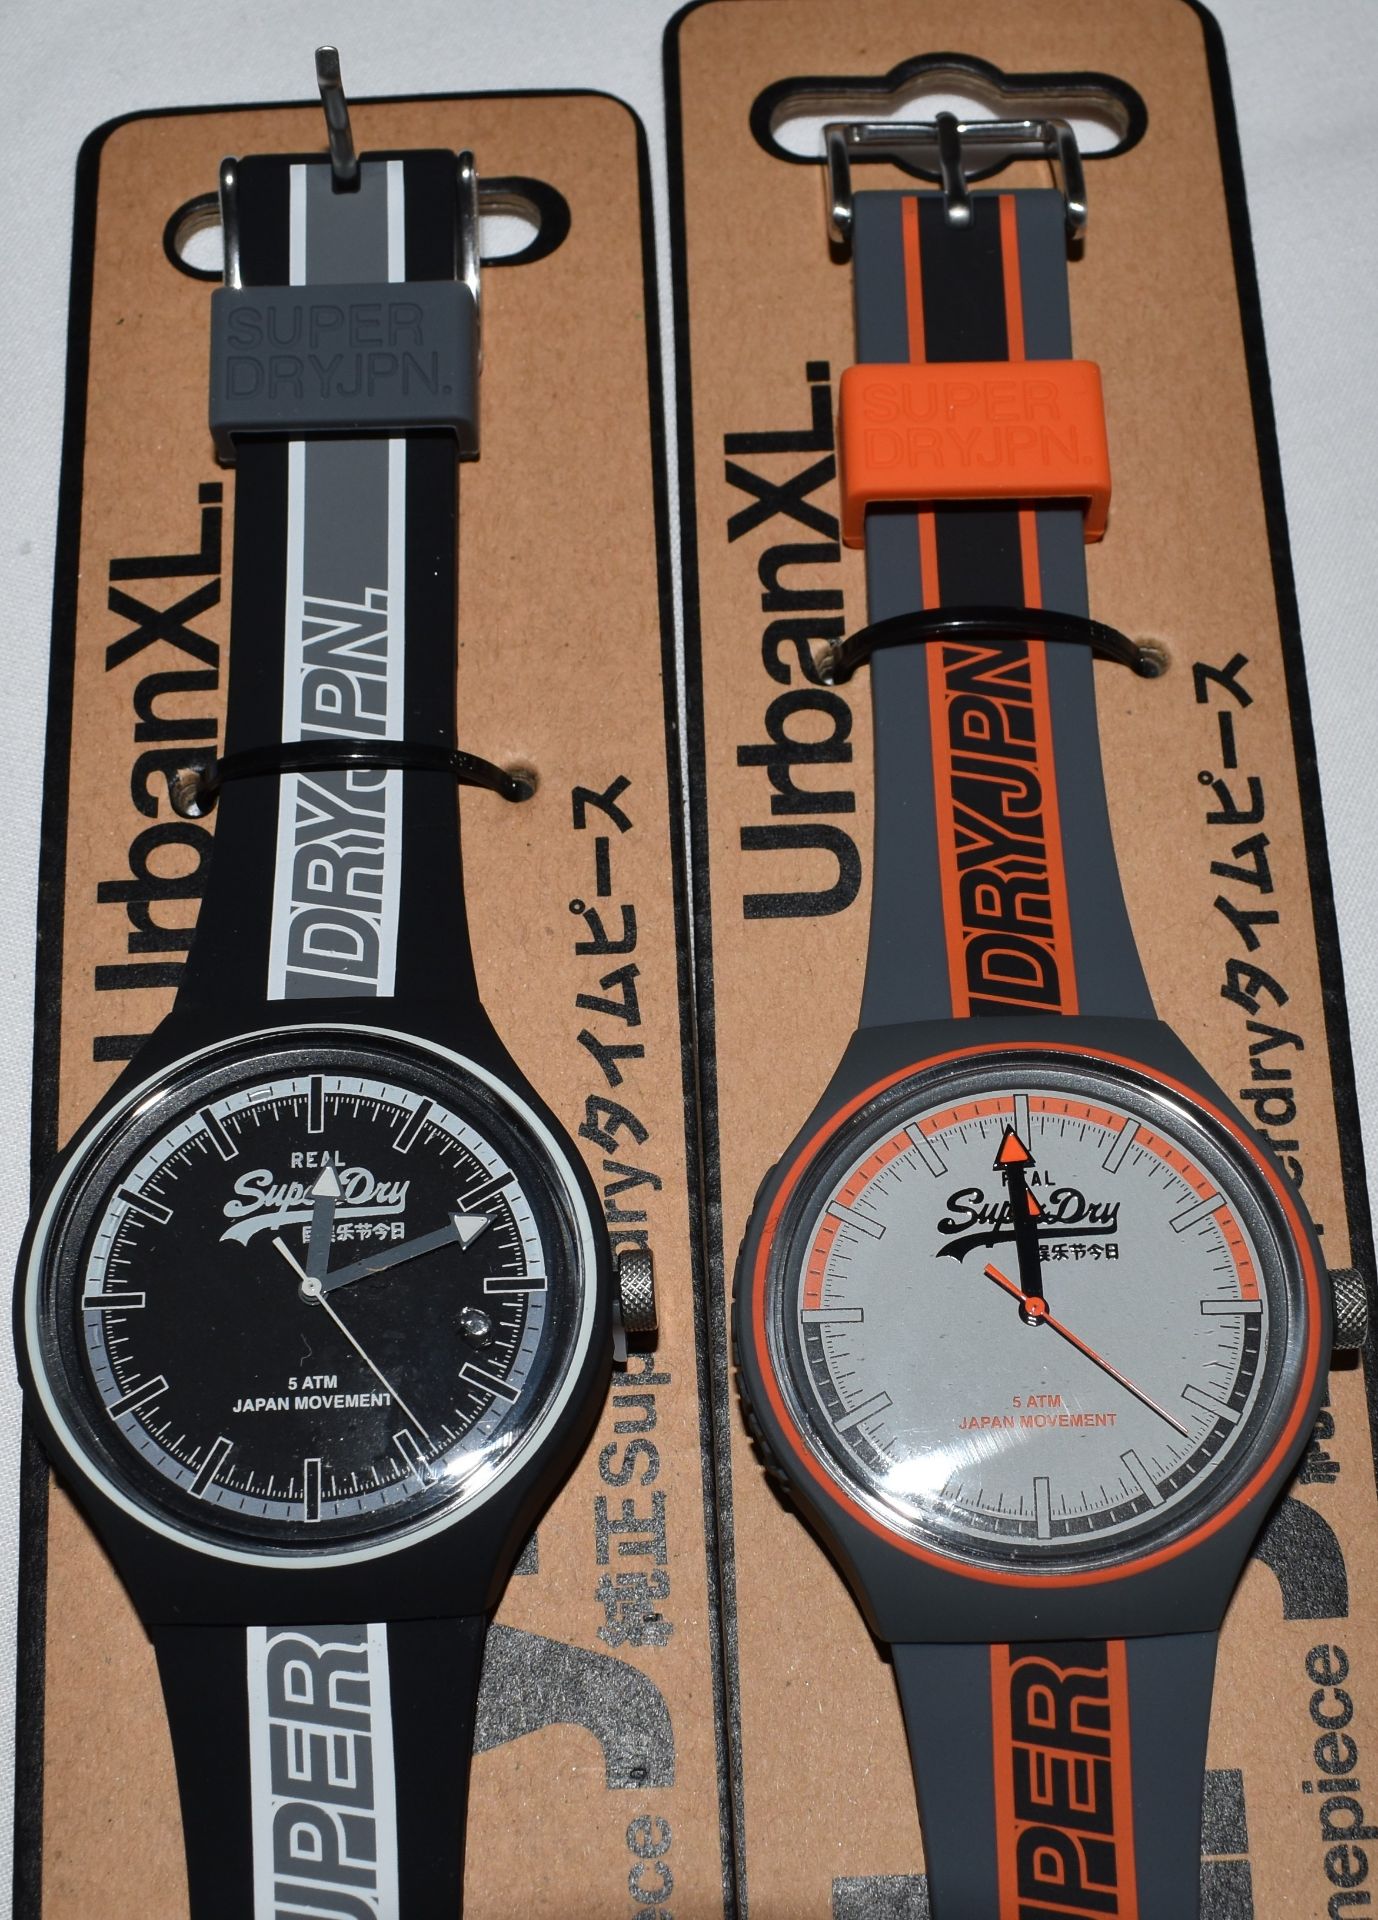 Superdry Sports watches x 2 in black and grey - Image 2 of 2